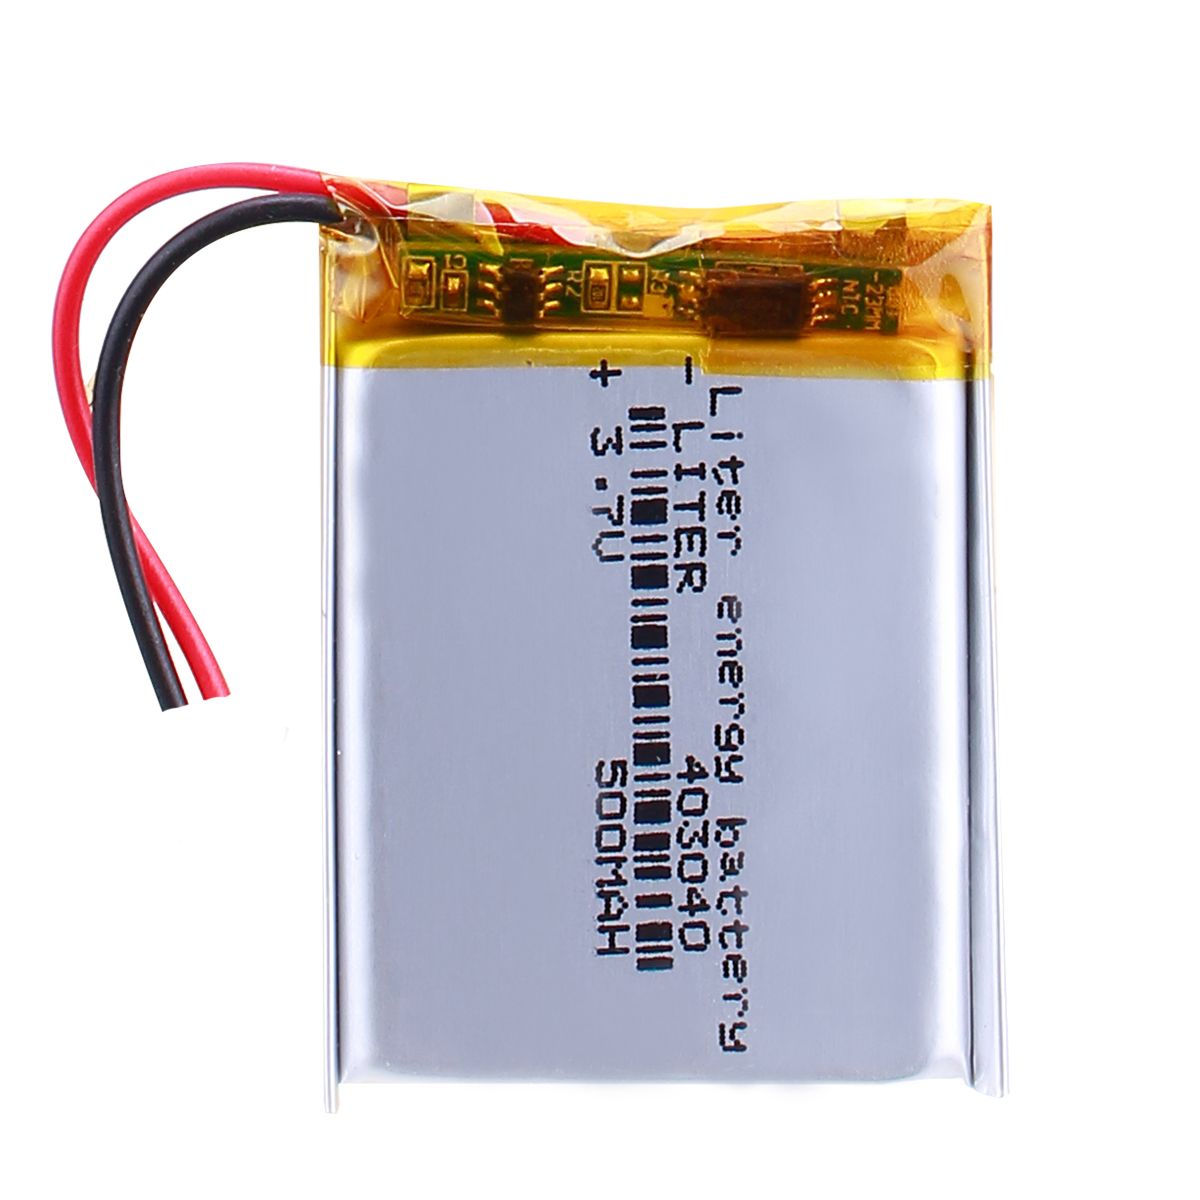 100pcs Lithium Polymer Battery liter 403040 3.7V 500mAh With PCM & Wires